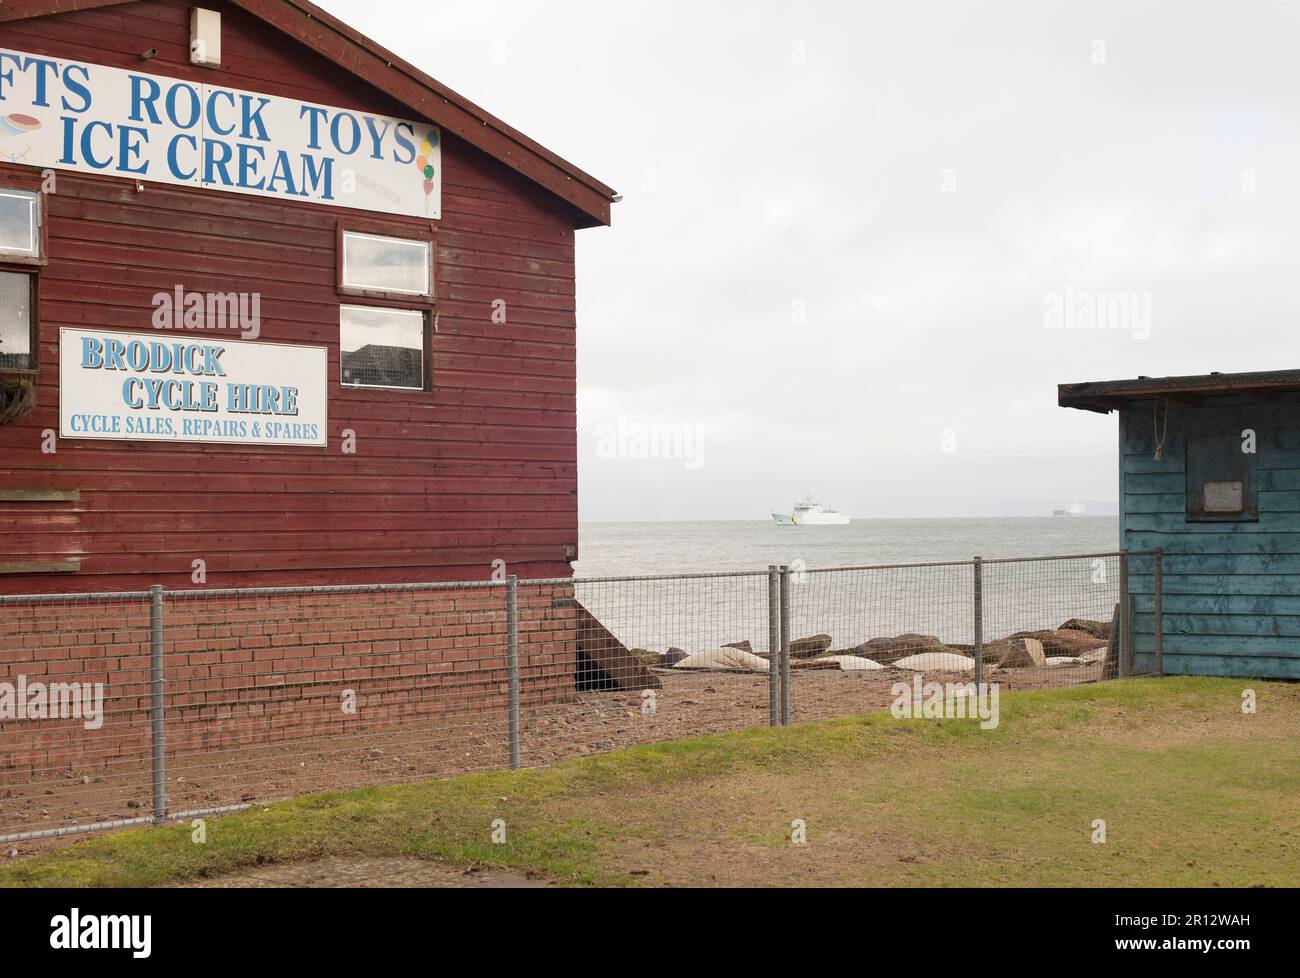 A cycle hire shop selling ice cream in Brodick on the Island of Arran in Scotland, looking out to ferries at sea. Stock Photo